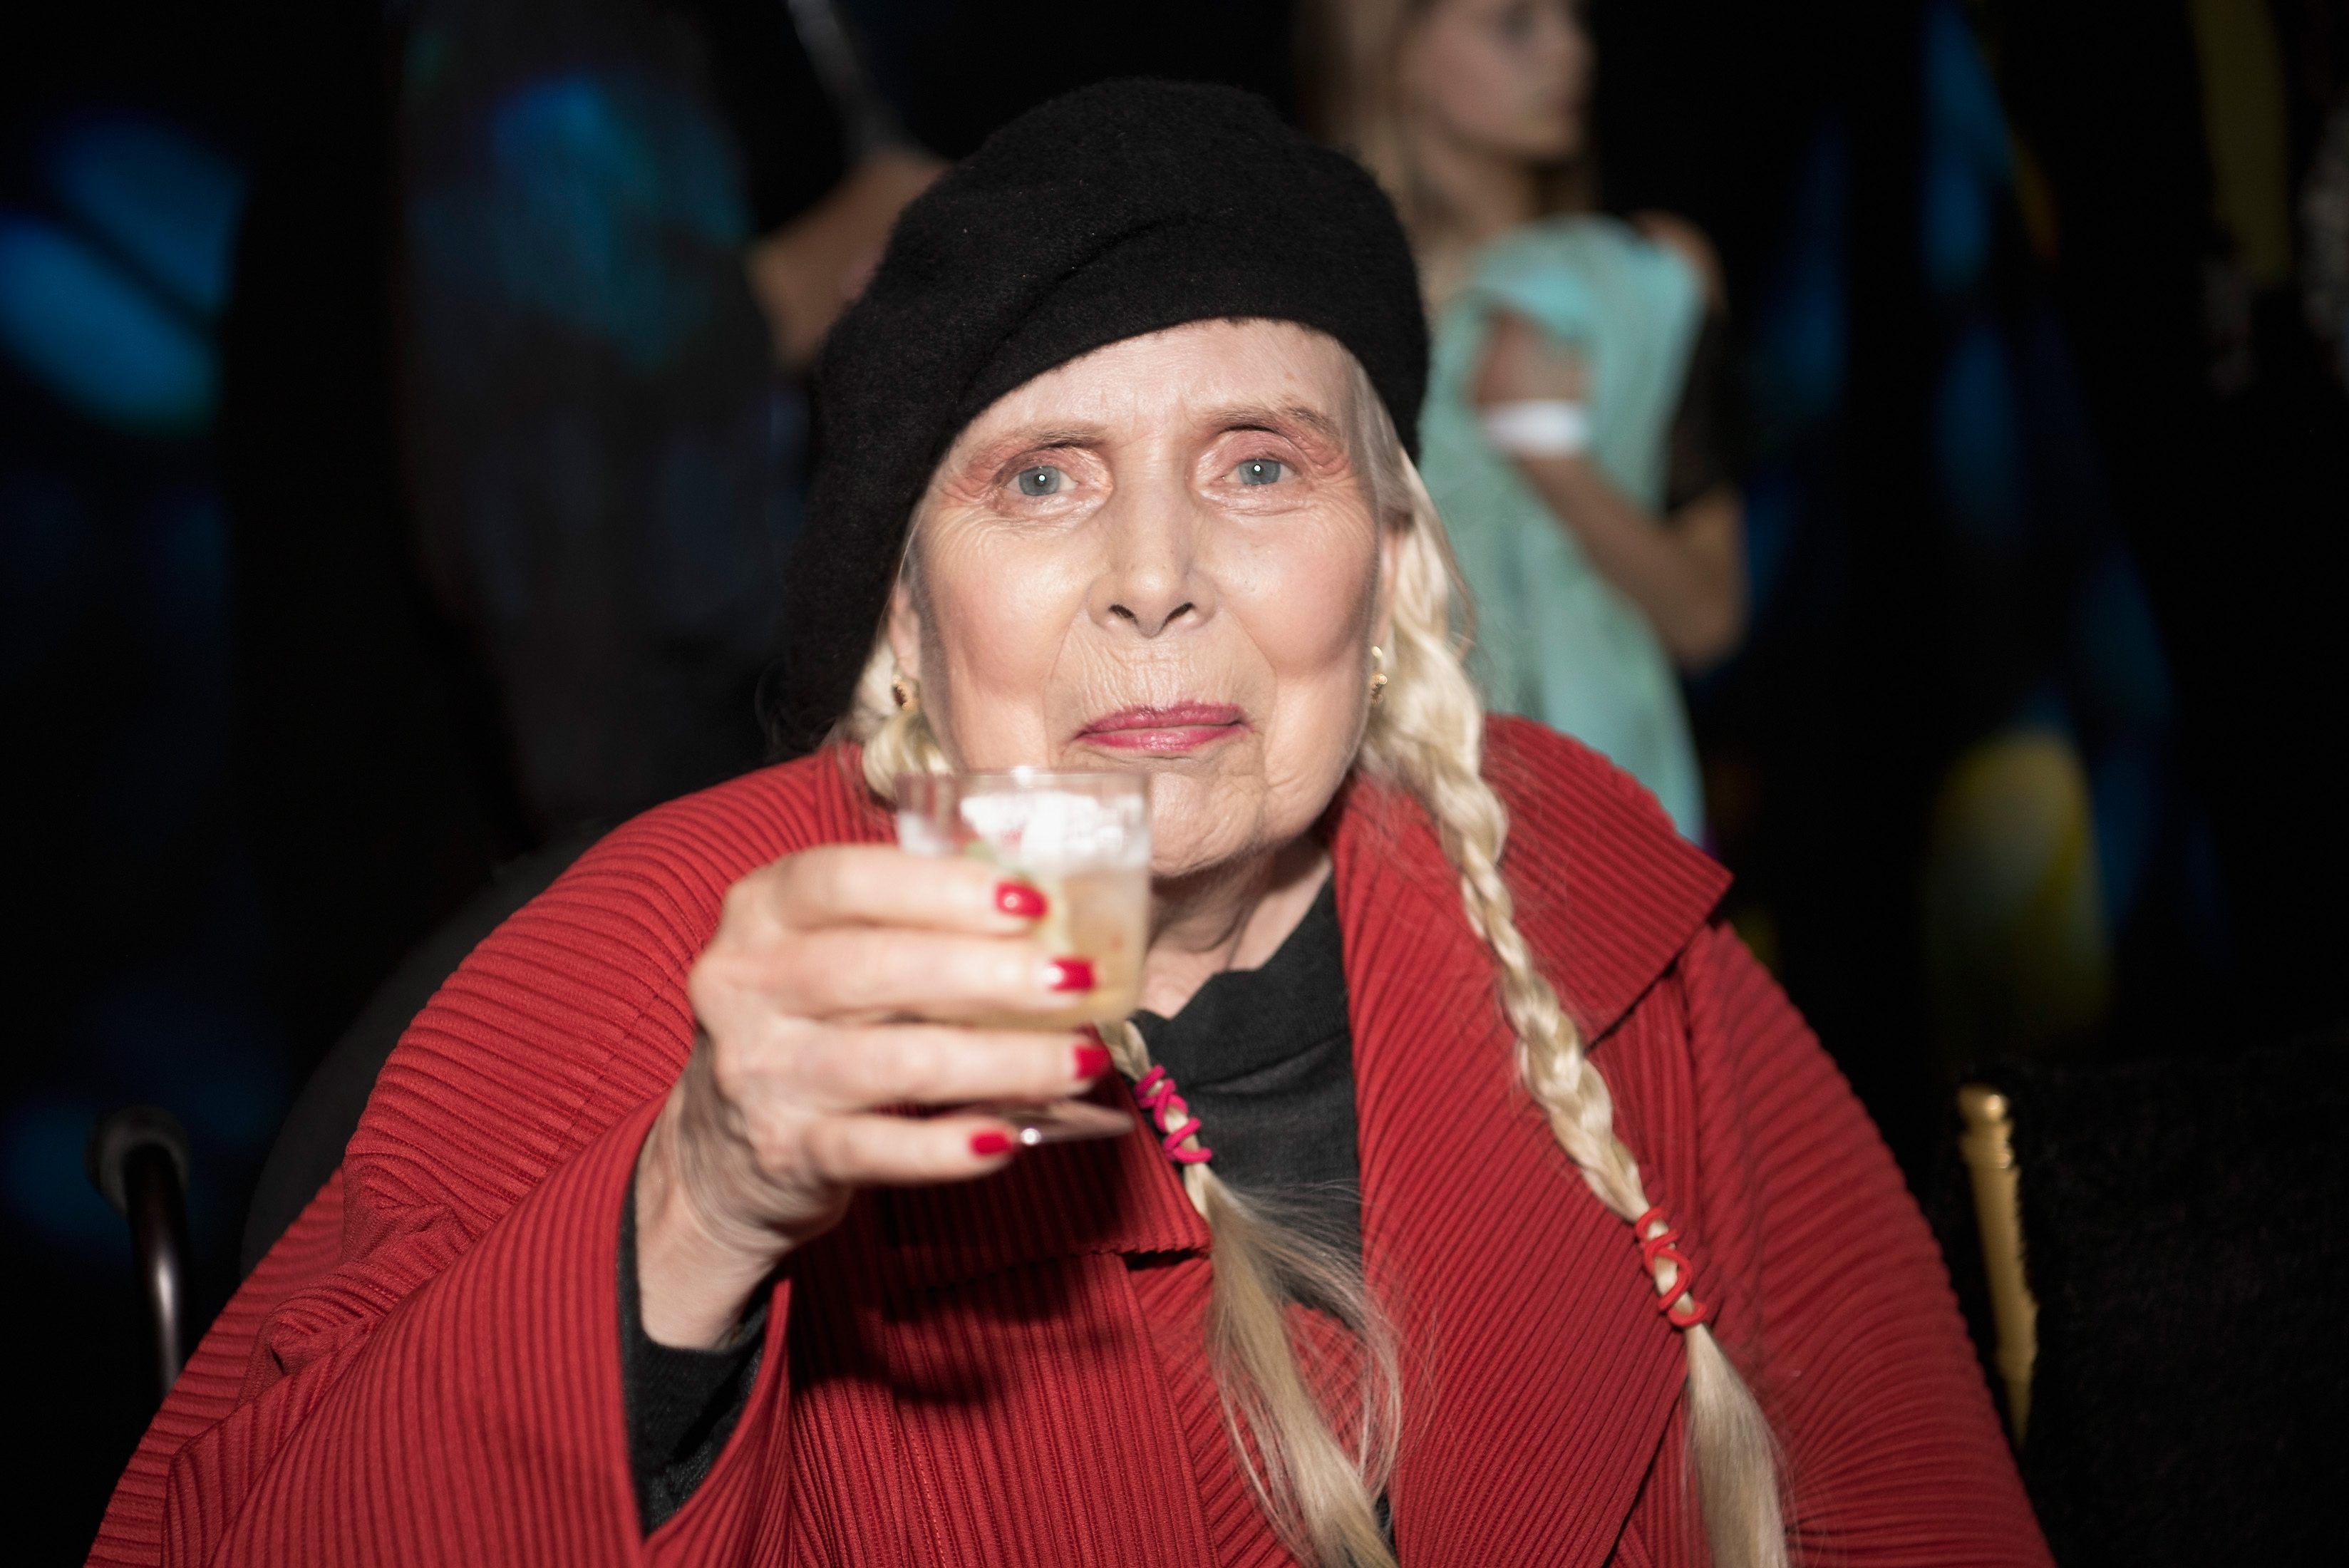 Joni Mitchell at Los Angeles Fashion Week on March 21, 2019 in Los Angeles, California.